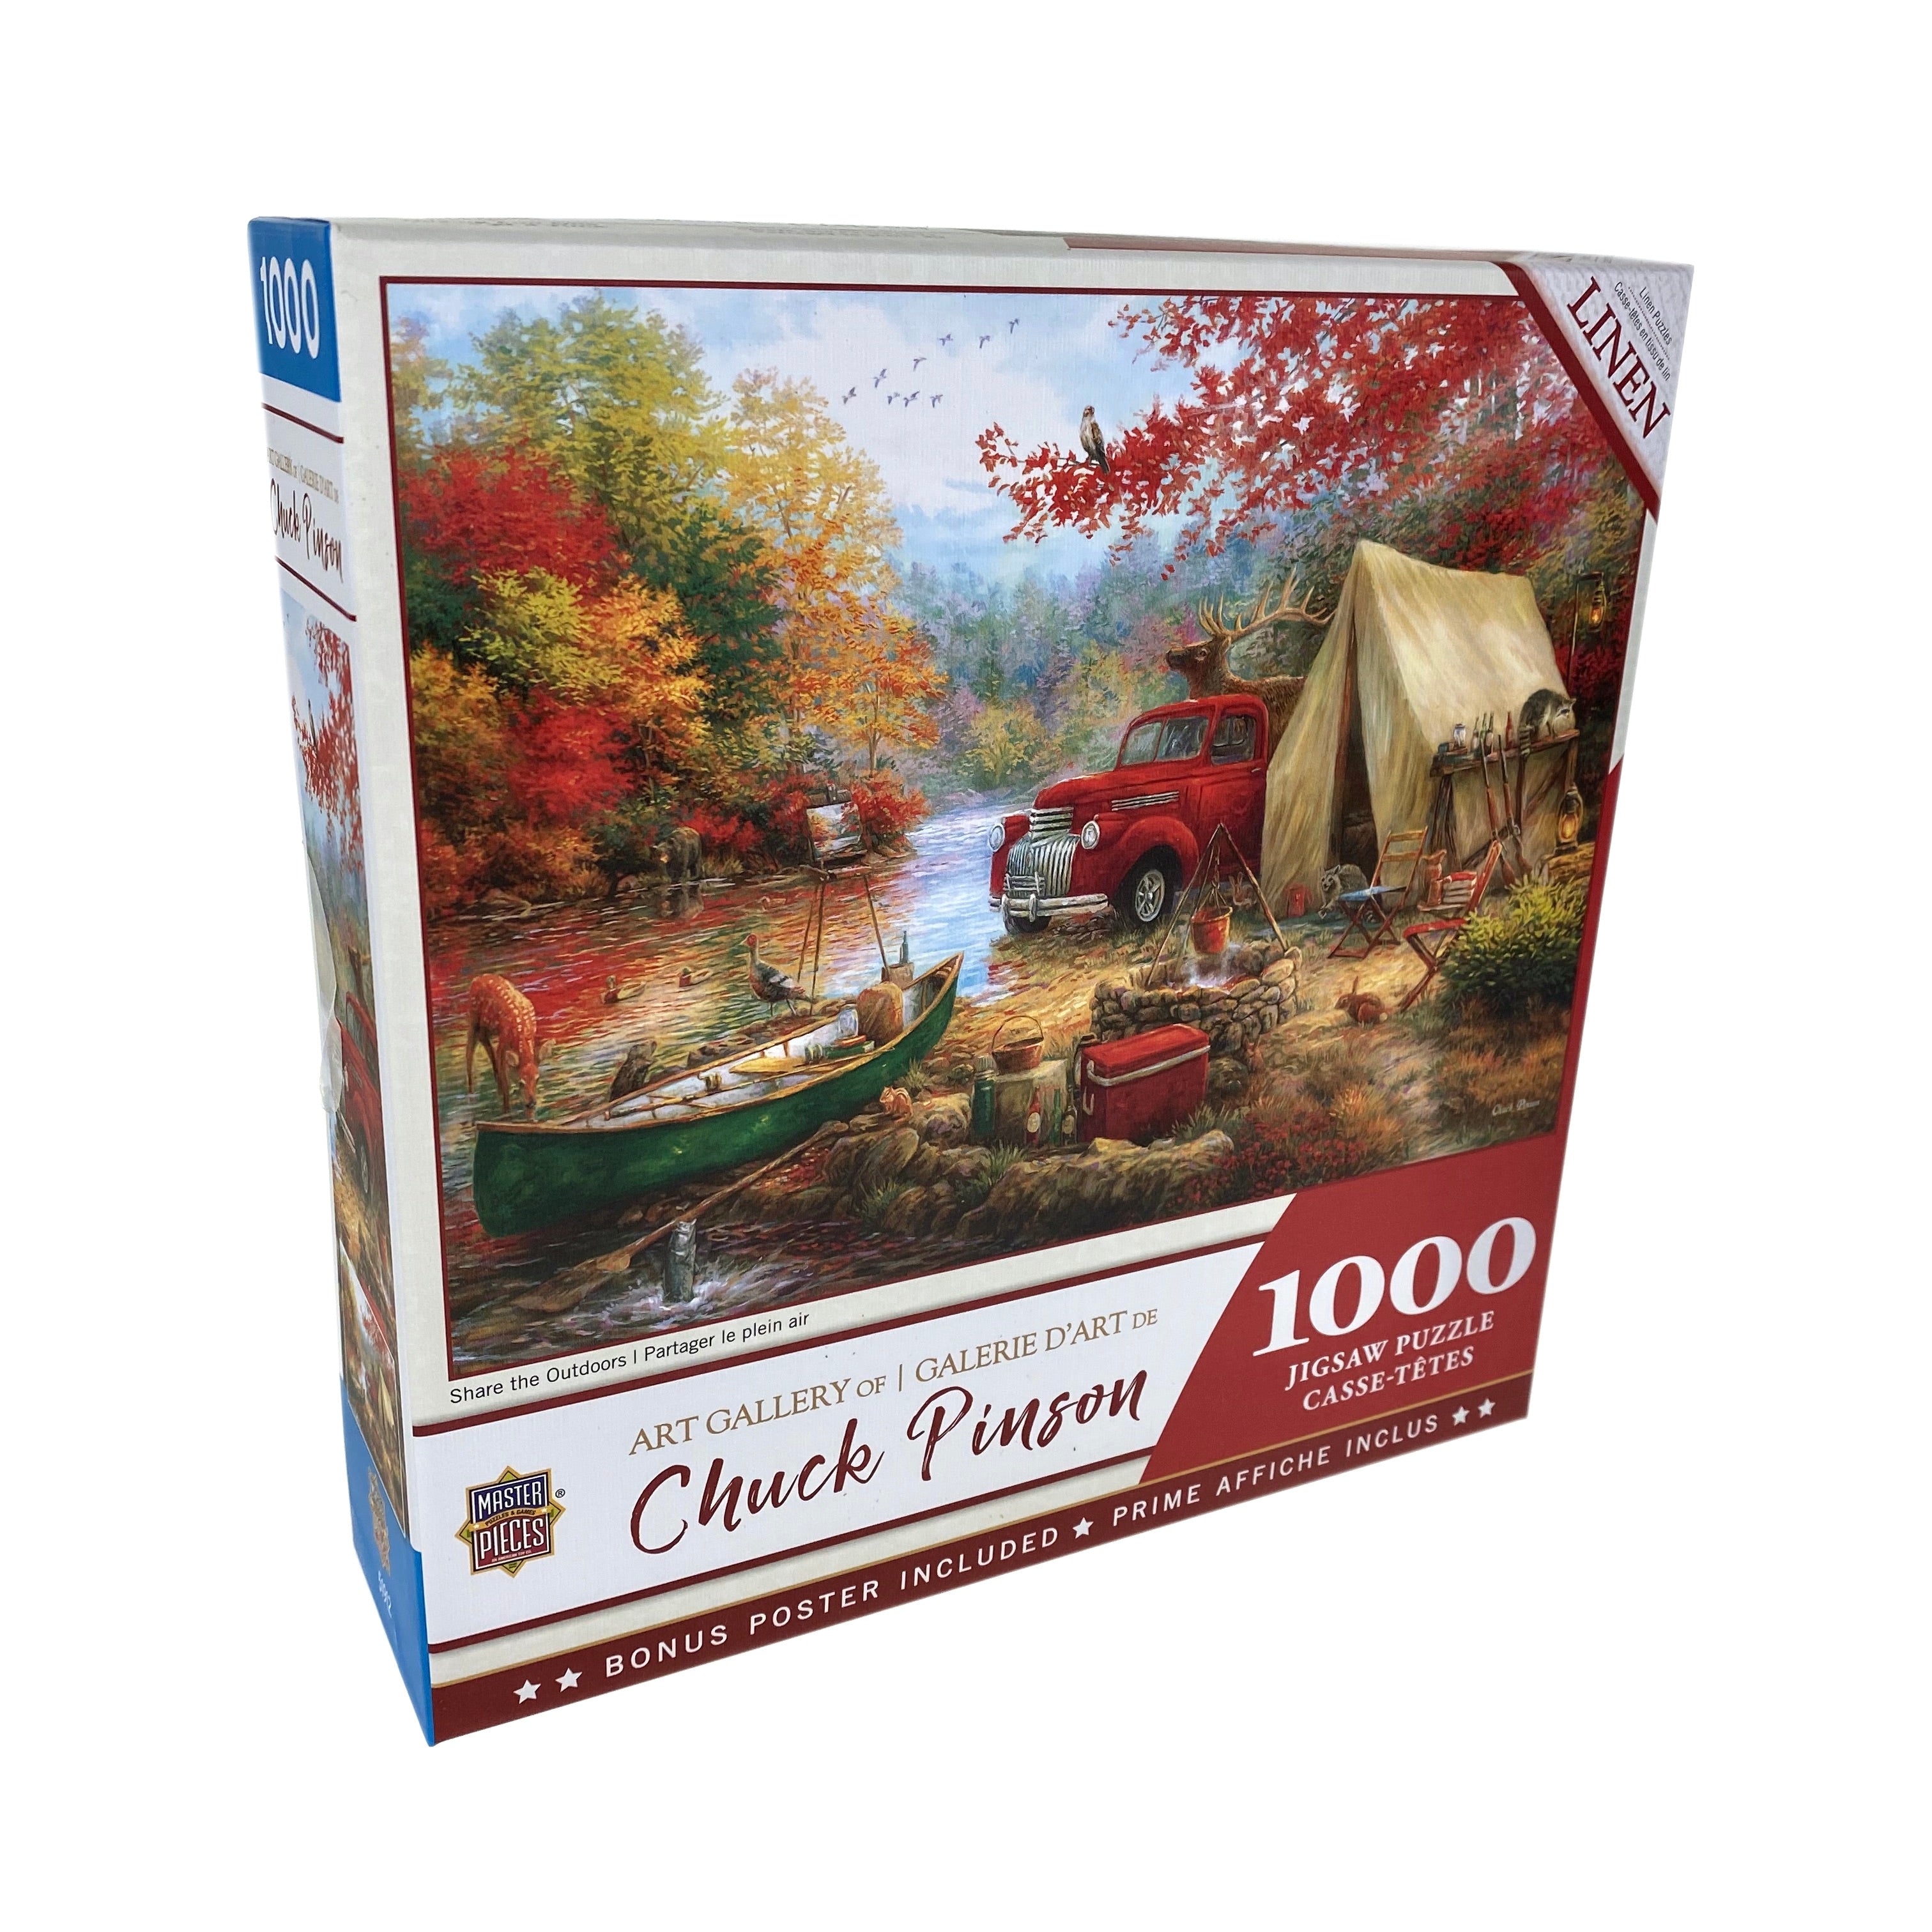 Share The Outdoors - 1000 Piece Chuck Pinson Puzzle    